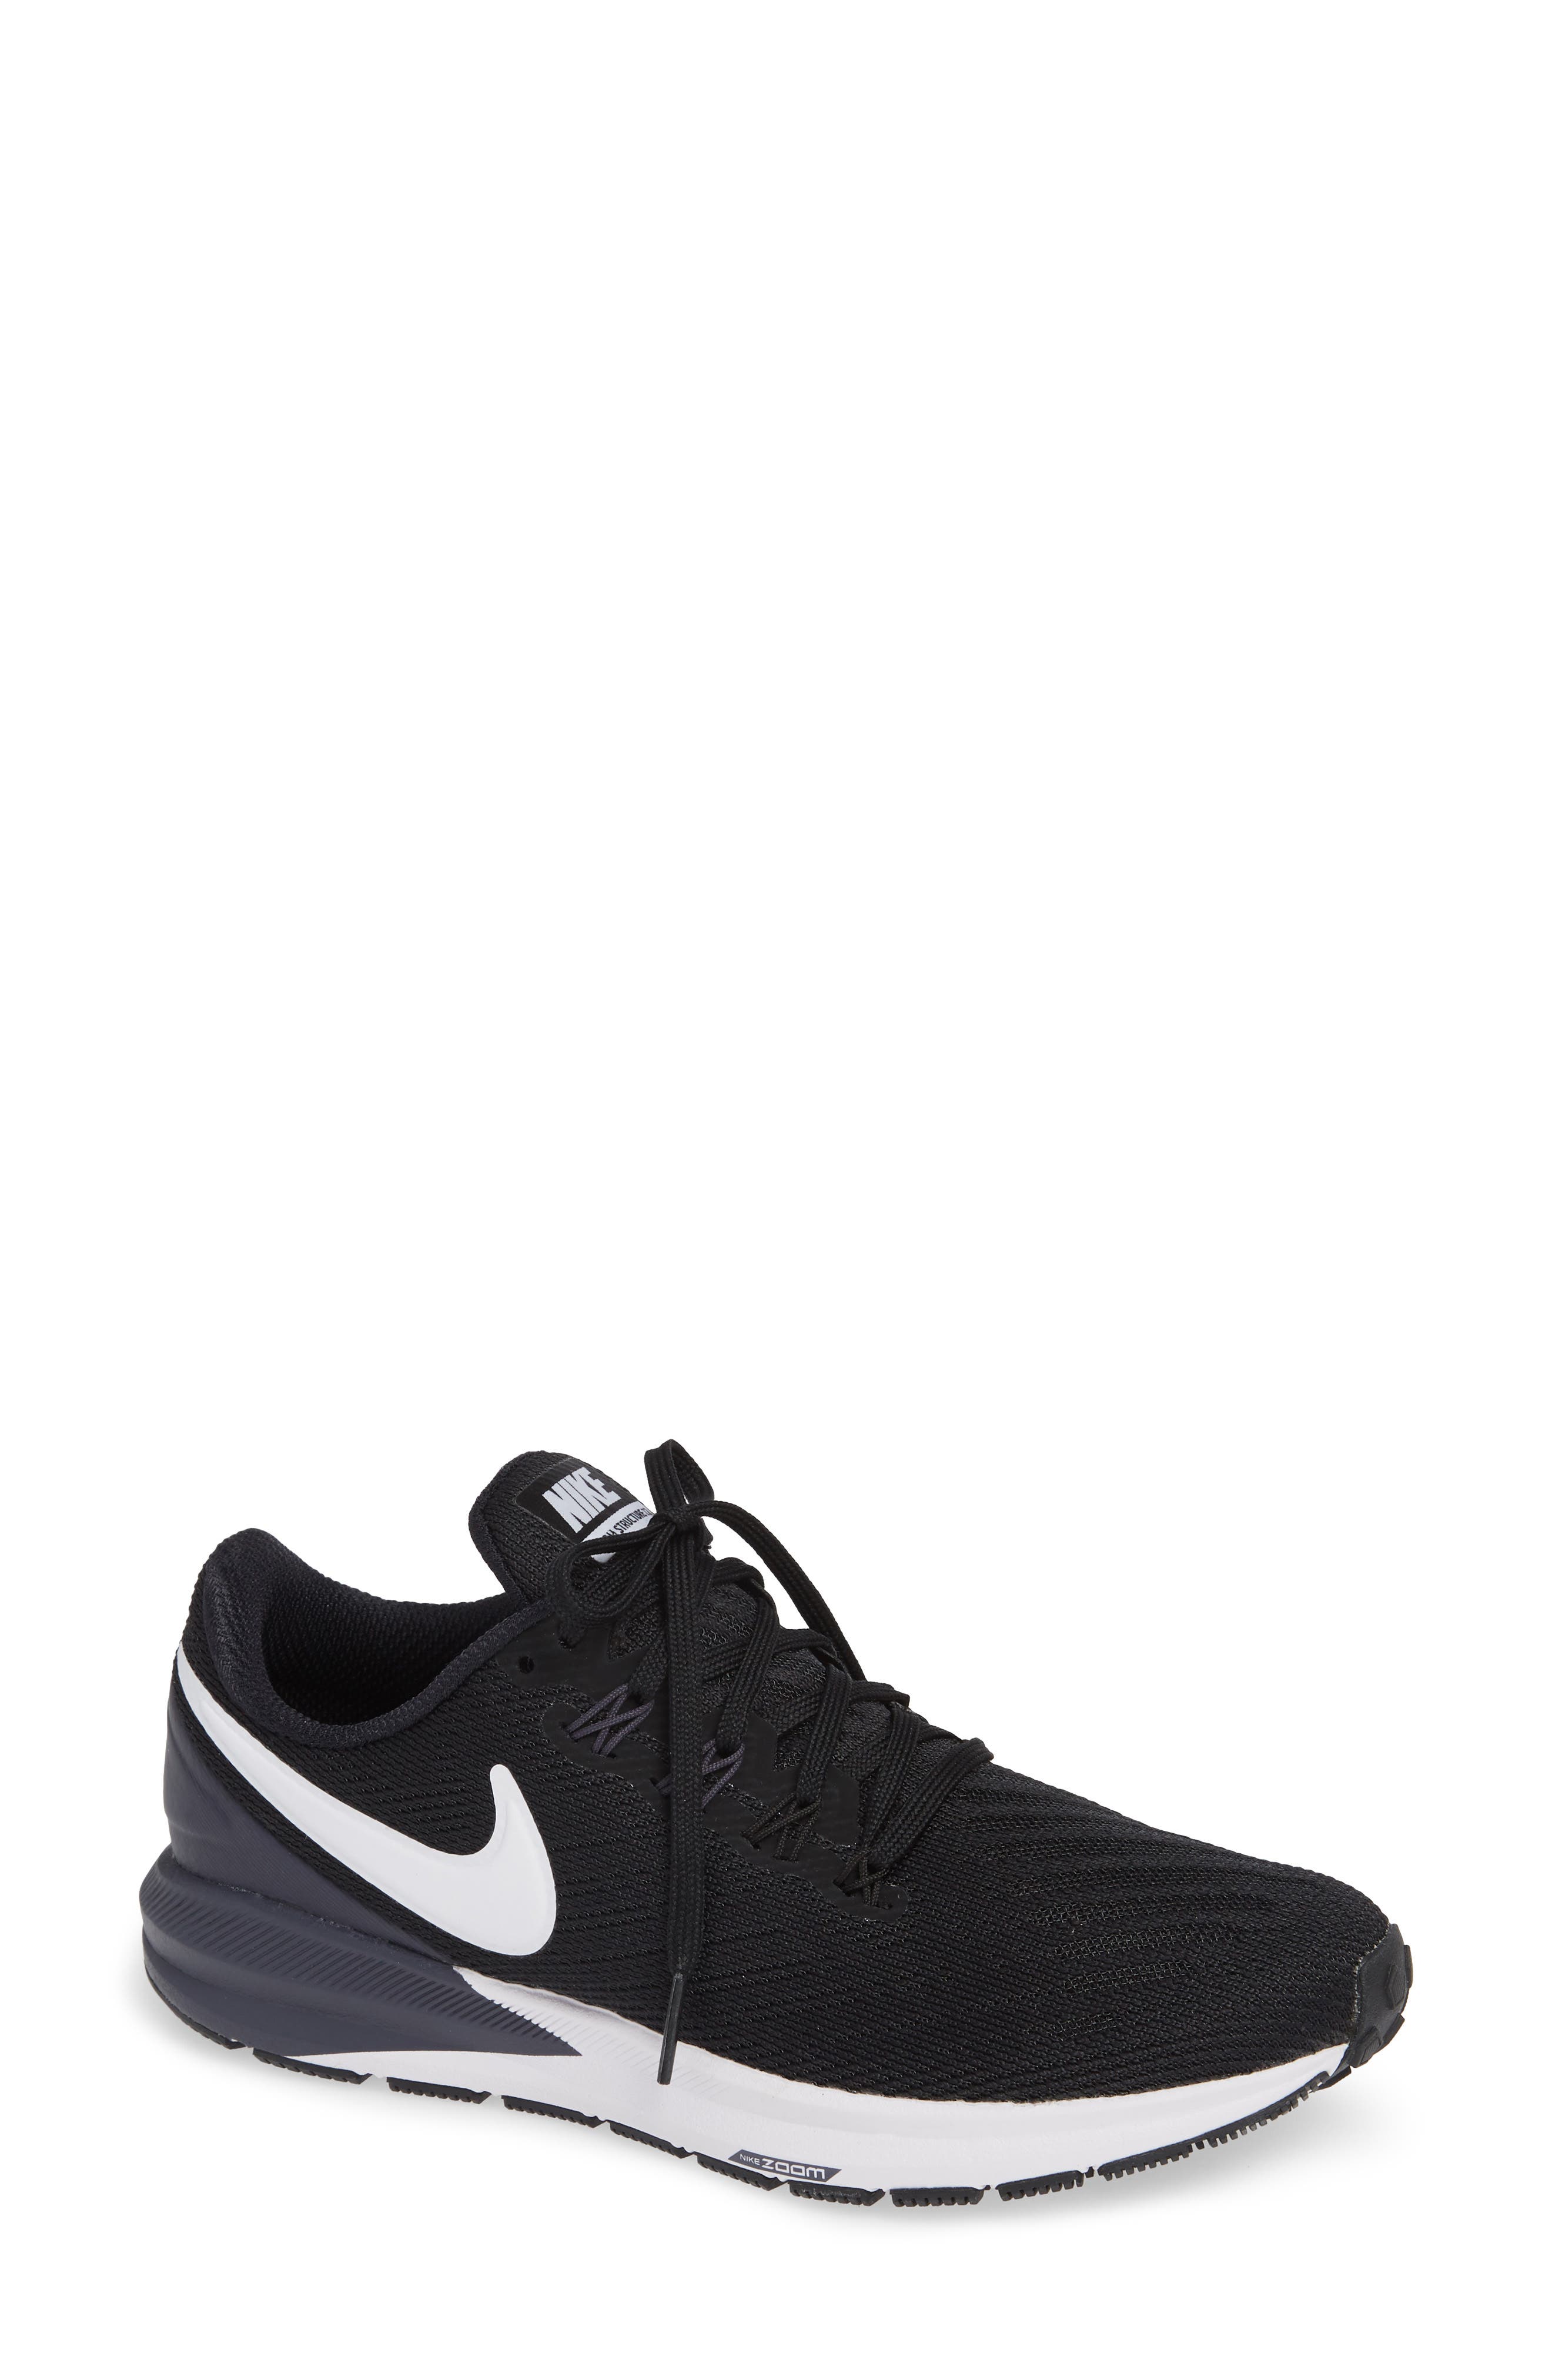 nike air zoom structure 22 women's running shoes